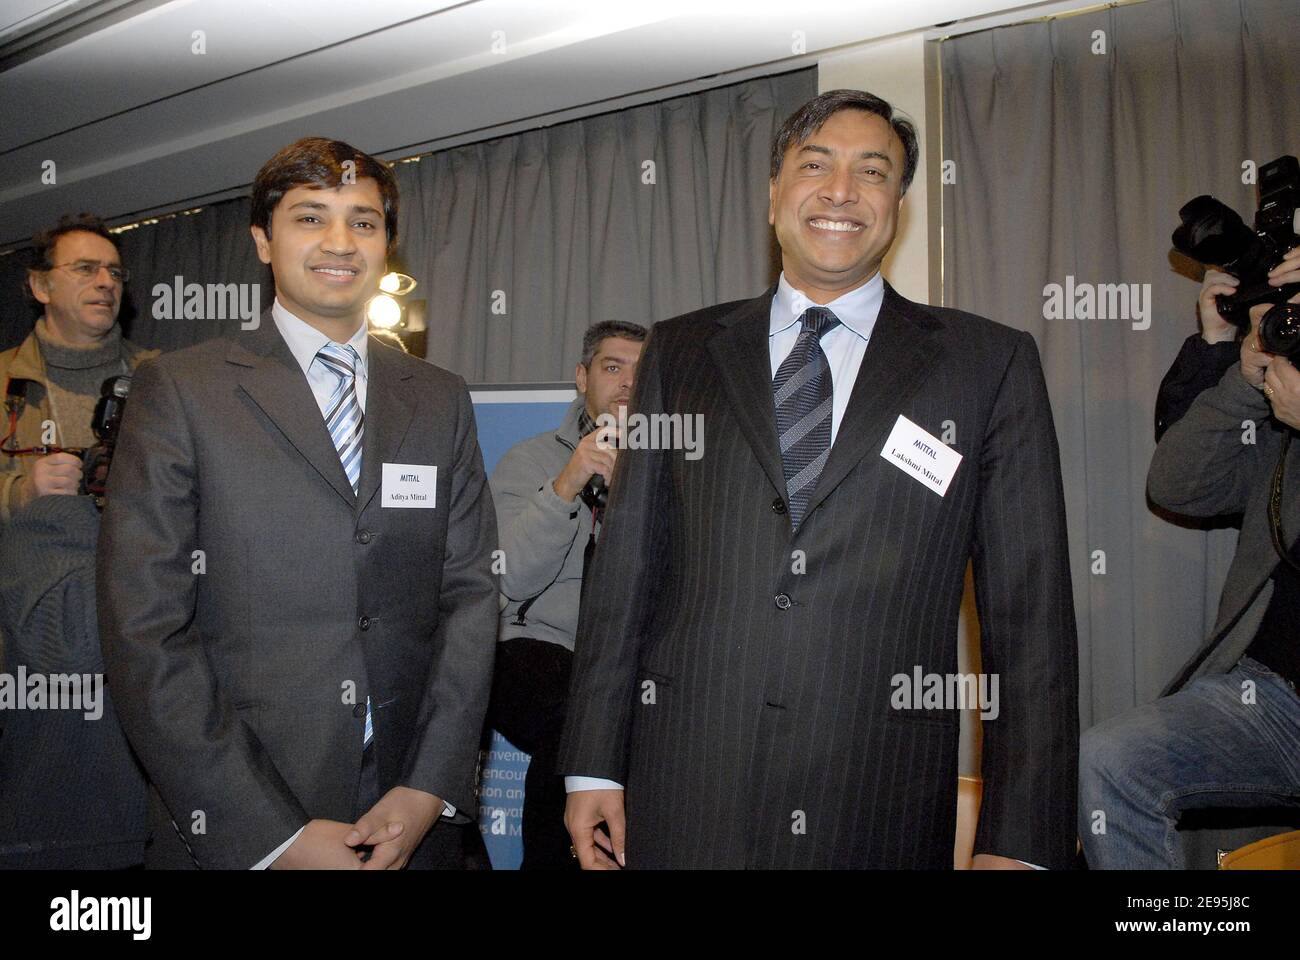 ArcelorMittal Finance director Aditya Mittal pictured during an